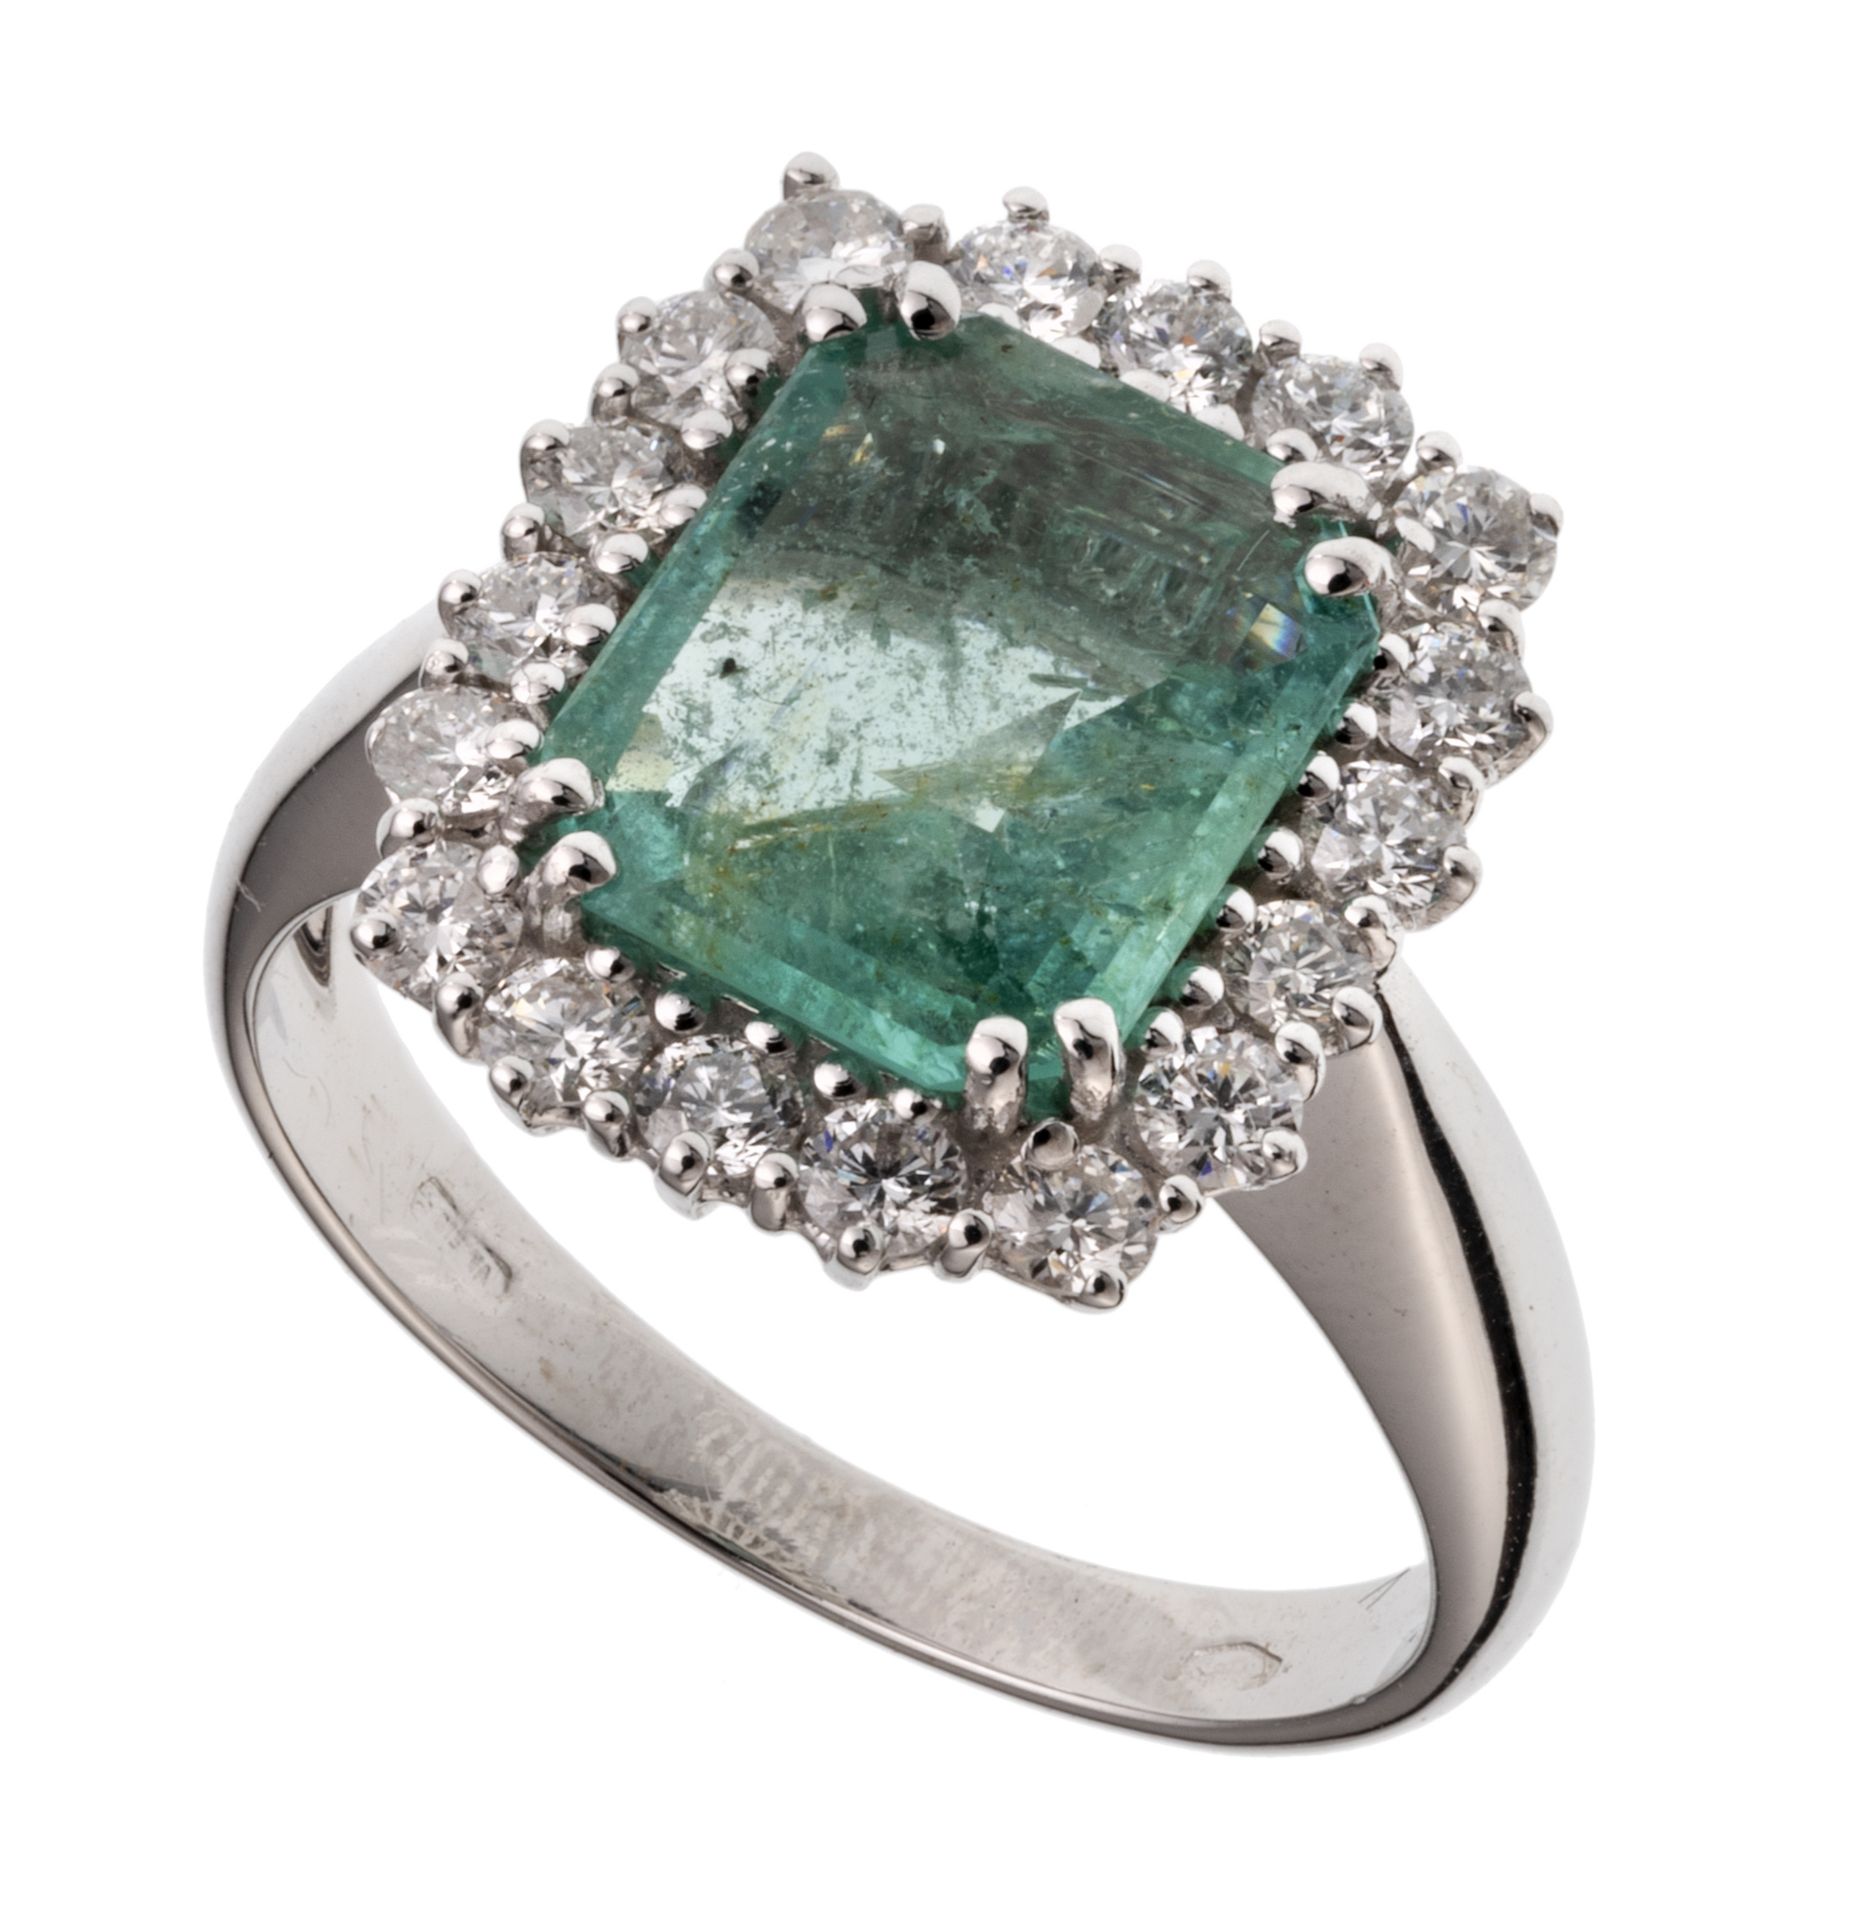 WHITE GOLD RING WITH CENTRAL EMERALD